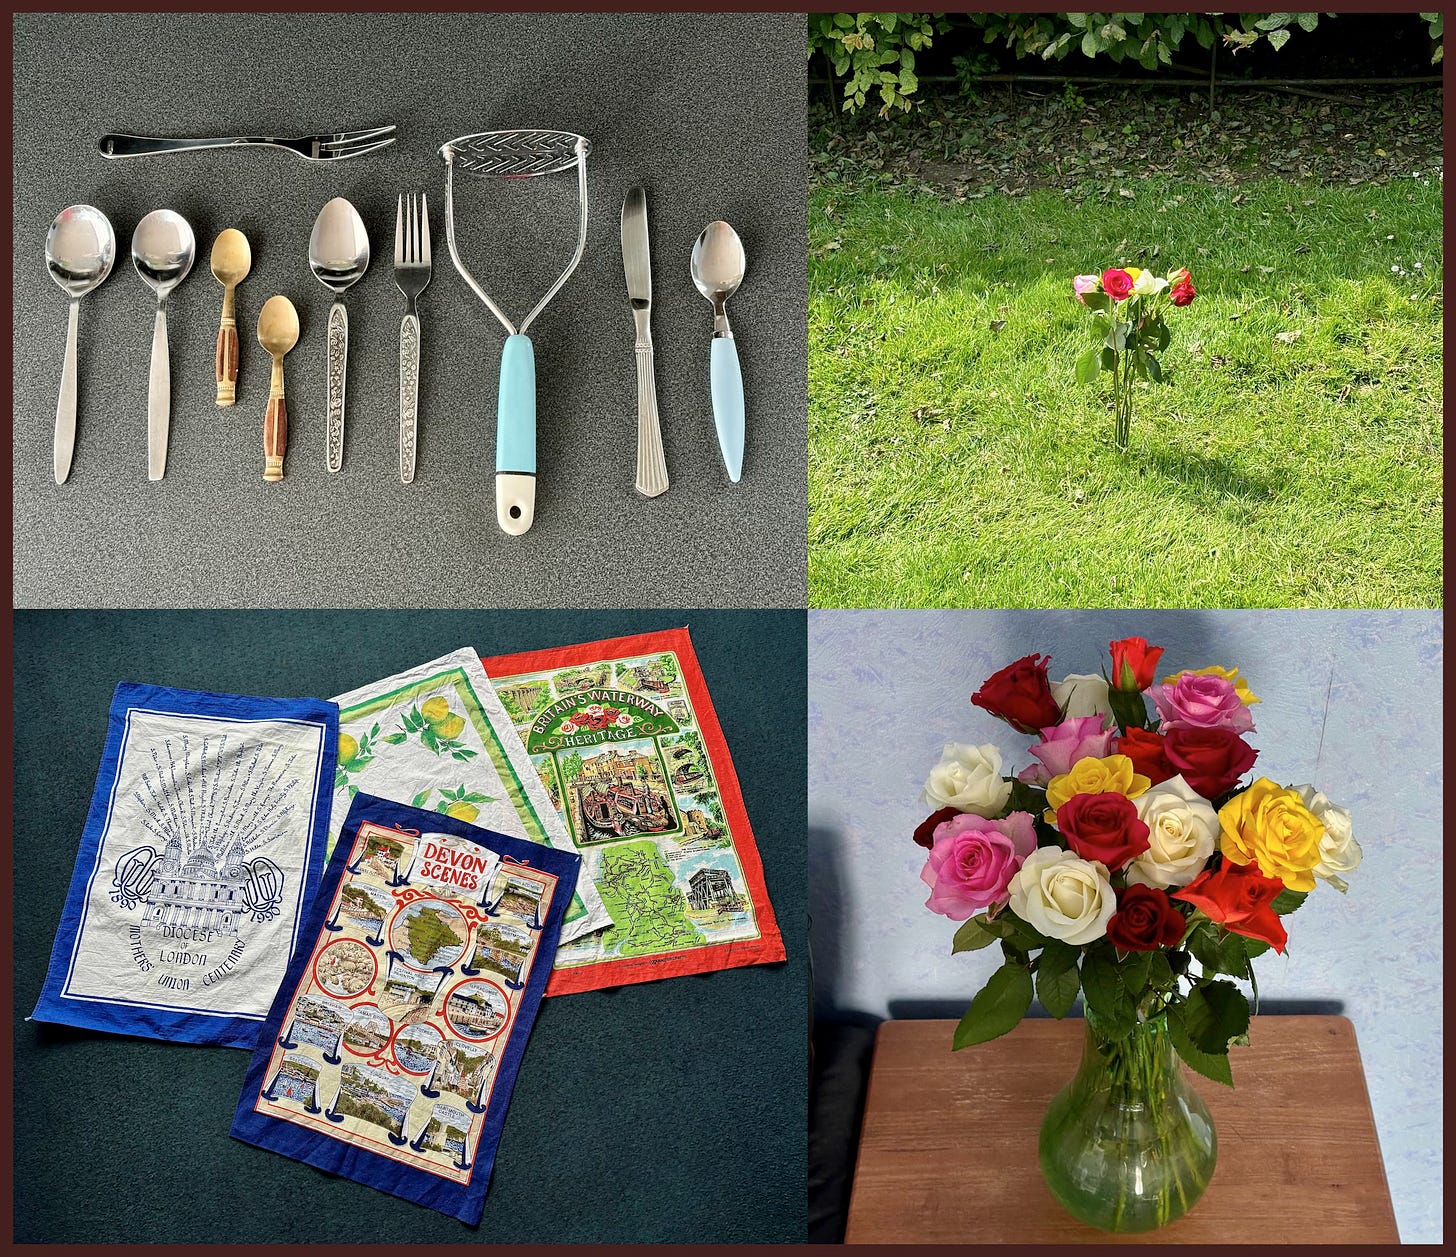 A collage of four images. Old cutlery, flowers in a field at a crematorium, four tea towels including one of Devon scenes, and flowers in a green glass vase.